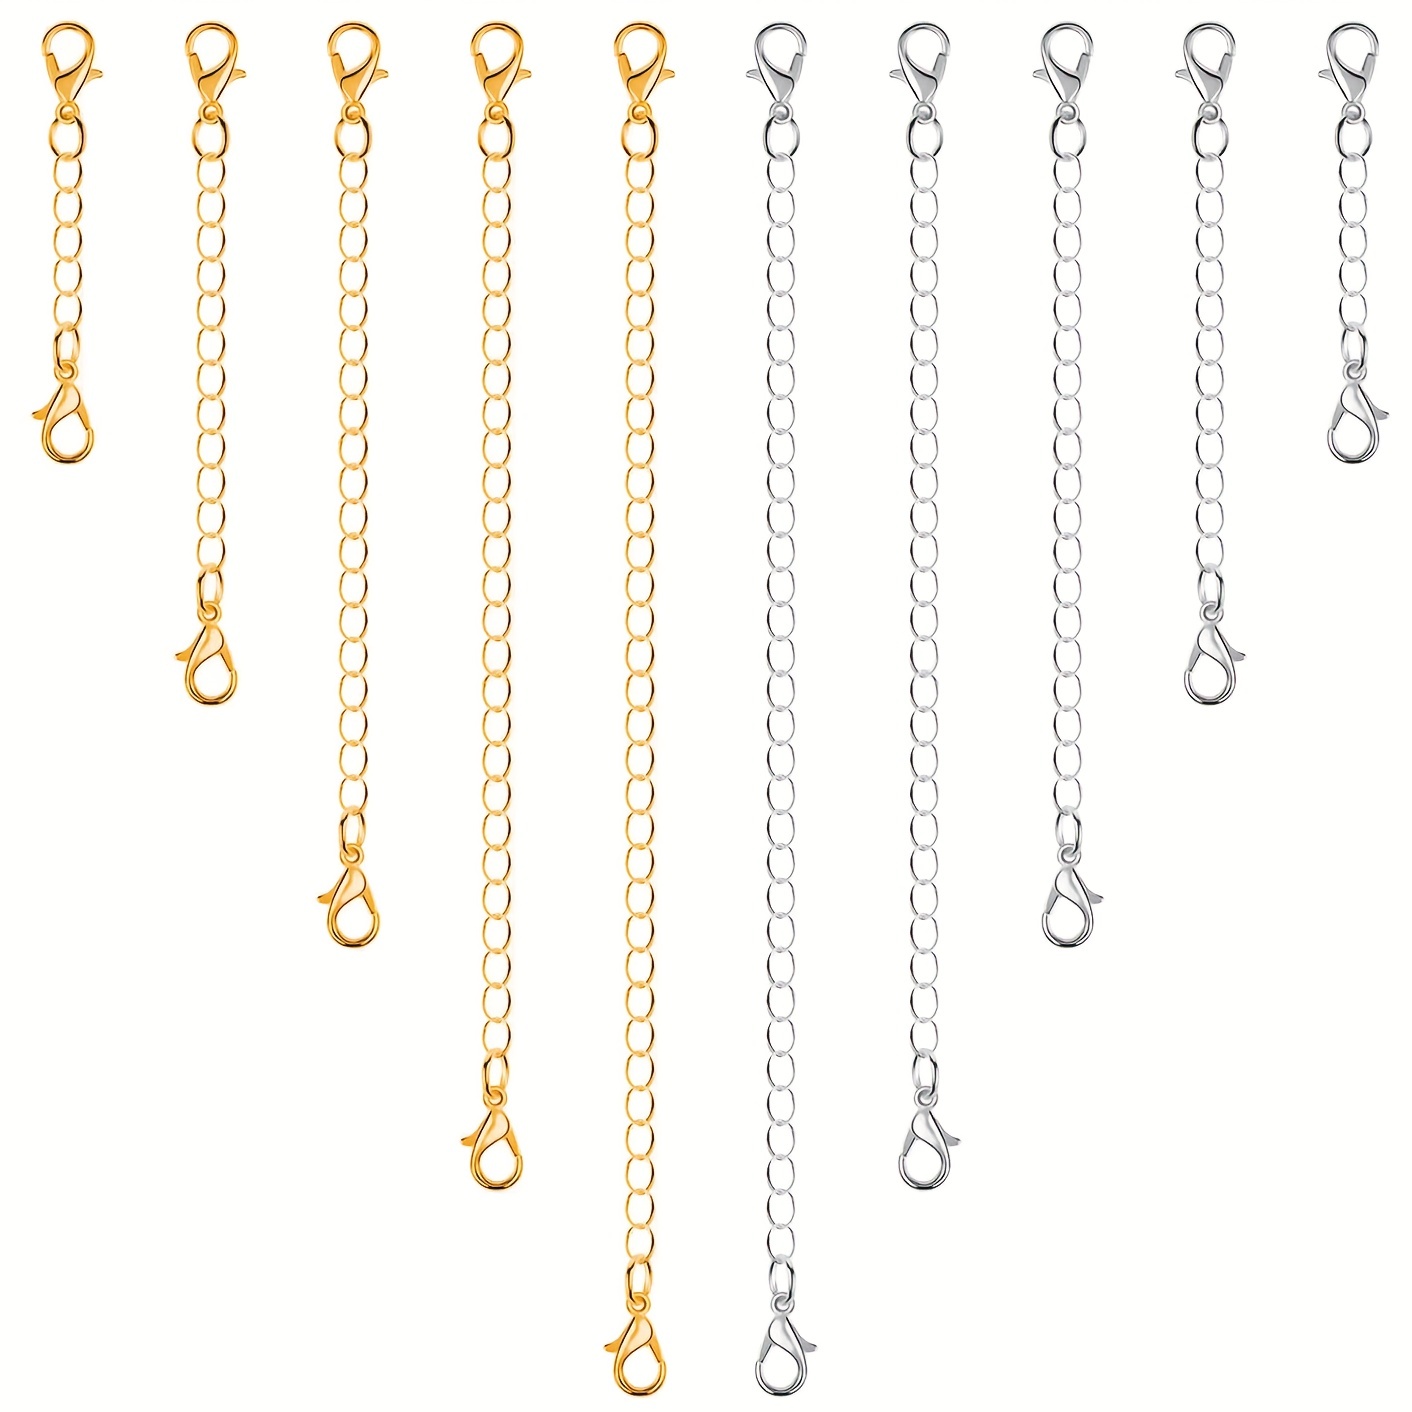  14K Yellow Gold 2 Inch Tiny Necklace Chain Extender, Real Gold  Durable Strong Removable Chain Extender for Gold Necklace Bracelet Jewelry  : Clothing, Shoes & Jewelry